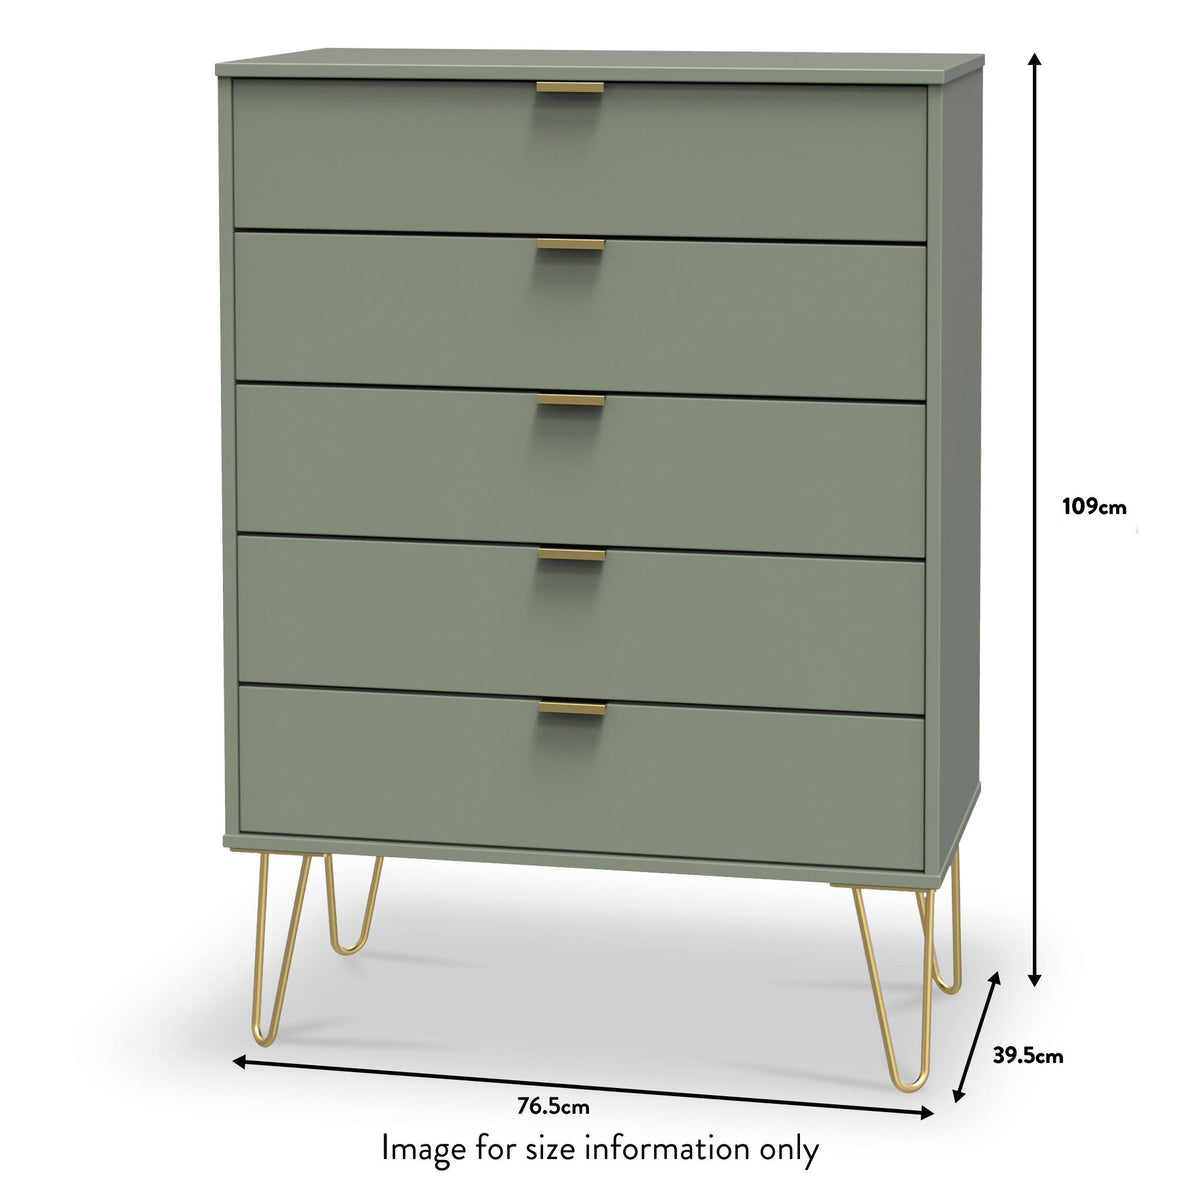 Moreno Olive Green 5 Drawer Chest with gold hairpin legs dimension guide